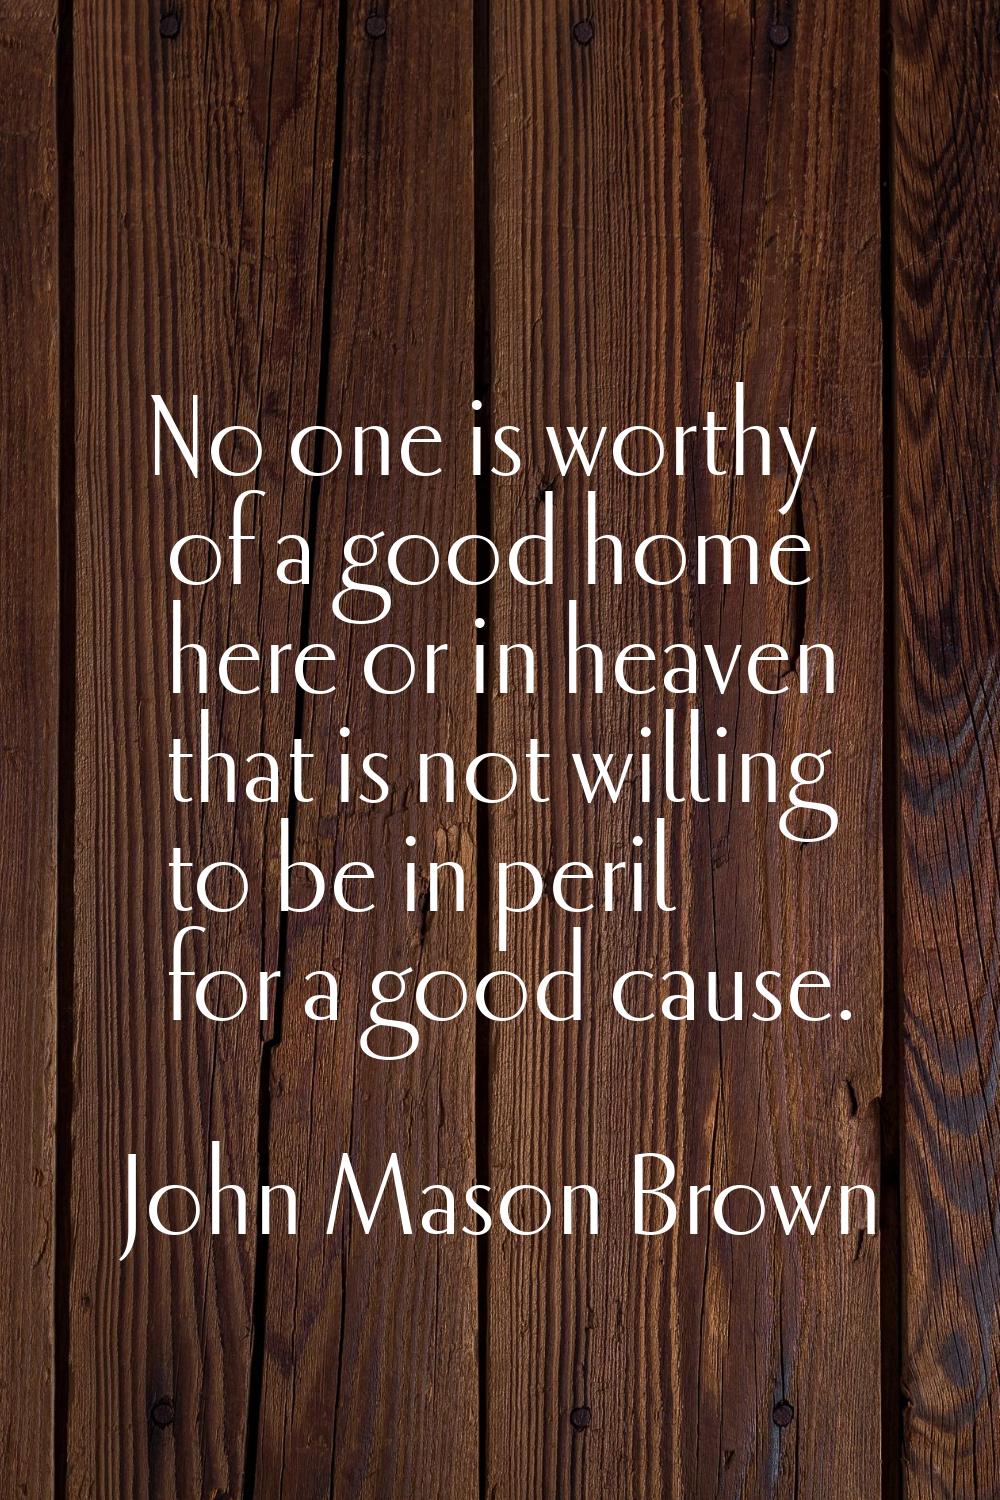 No one is worthy of a good home here or in heaven that is not willing to be in peril for a good cau